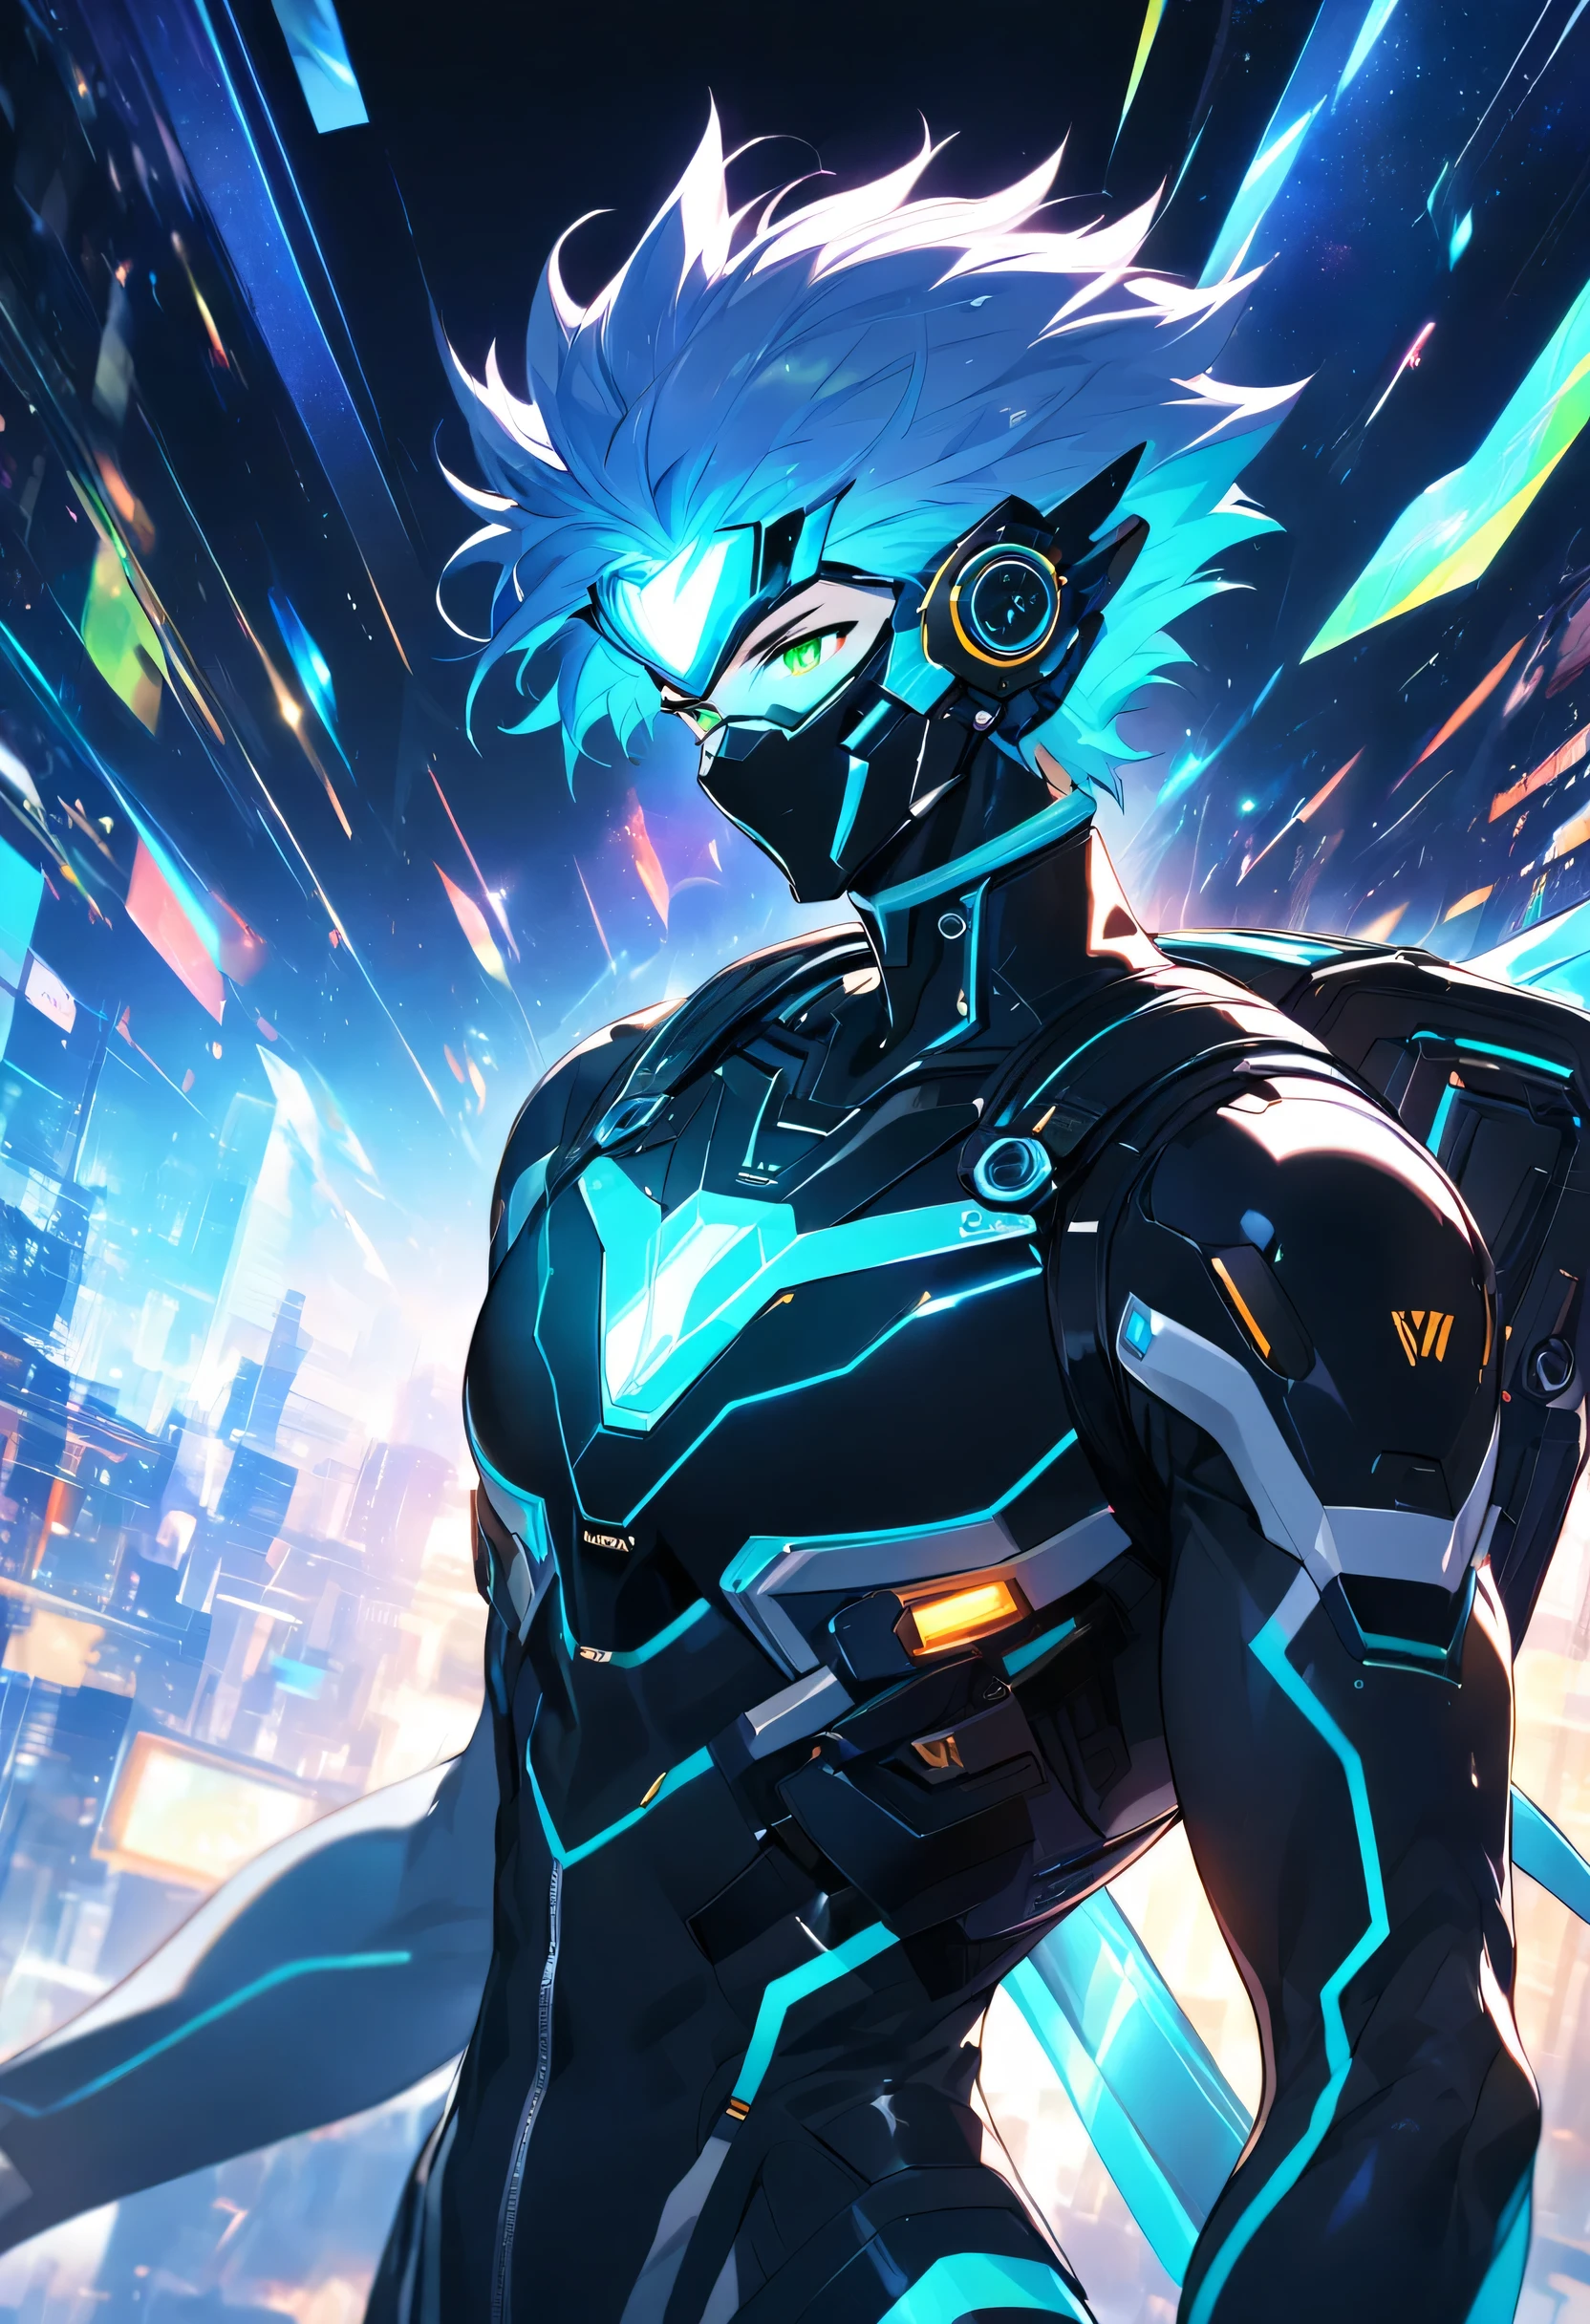 A friendly and charismatic male character in a futuristic black and blue cyber suit with glowing LED lines, short spiky blue hair, and sharp green eyes. He is tall, muscular, and has an energy backpack on his back. The character is smiling warmly and in a relaxed posture, exuding a welcoming and approachable aura. The background is a digital cityscape with floating holographic elements and light effects, representing a cybernetic world.